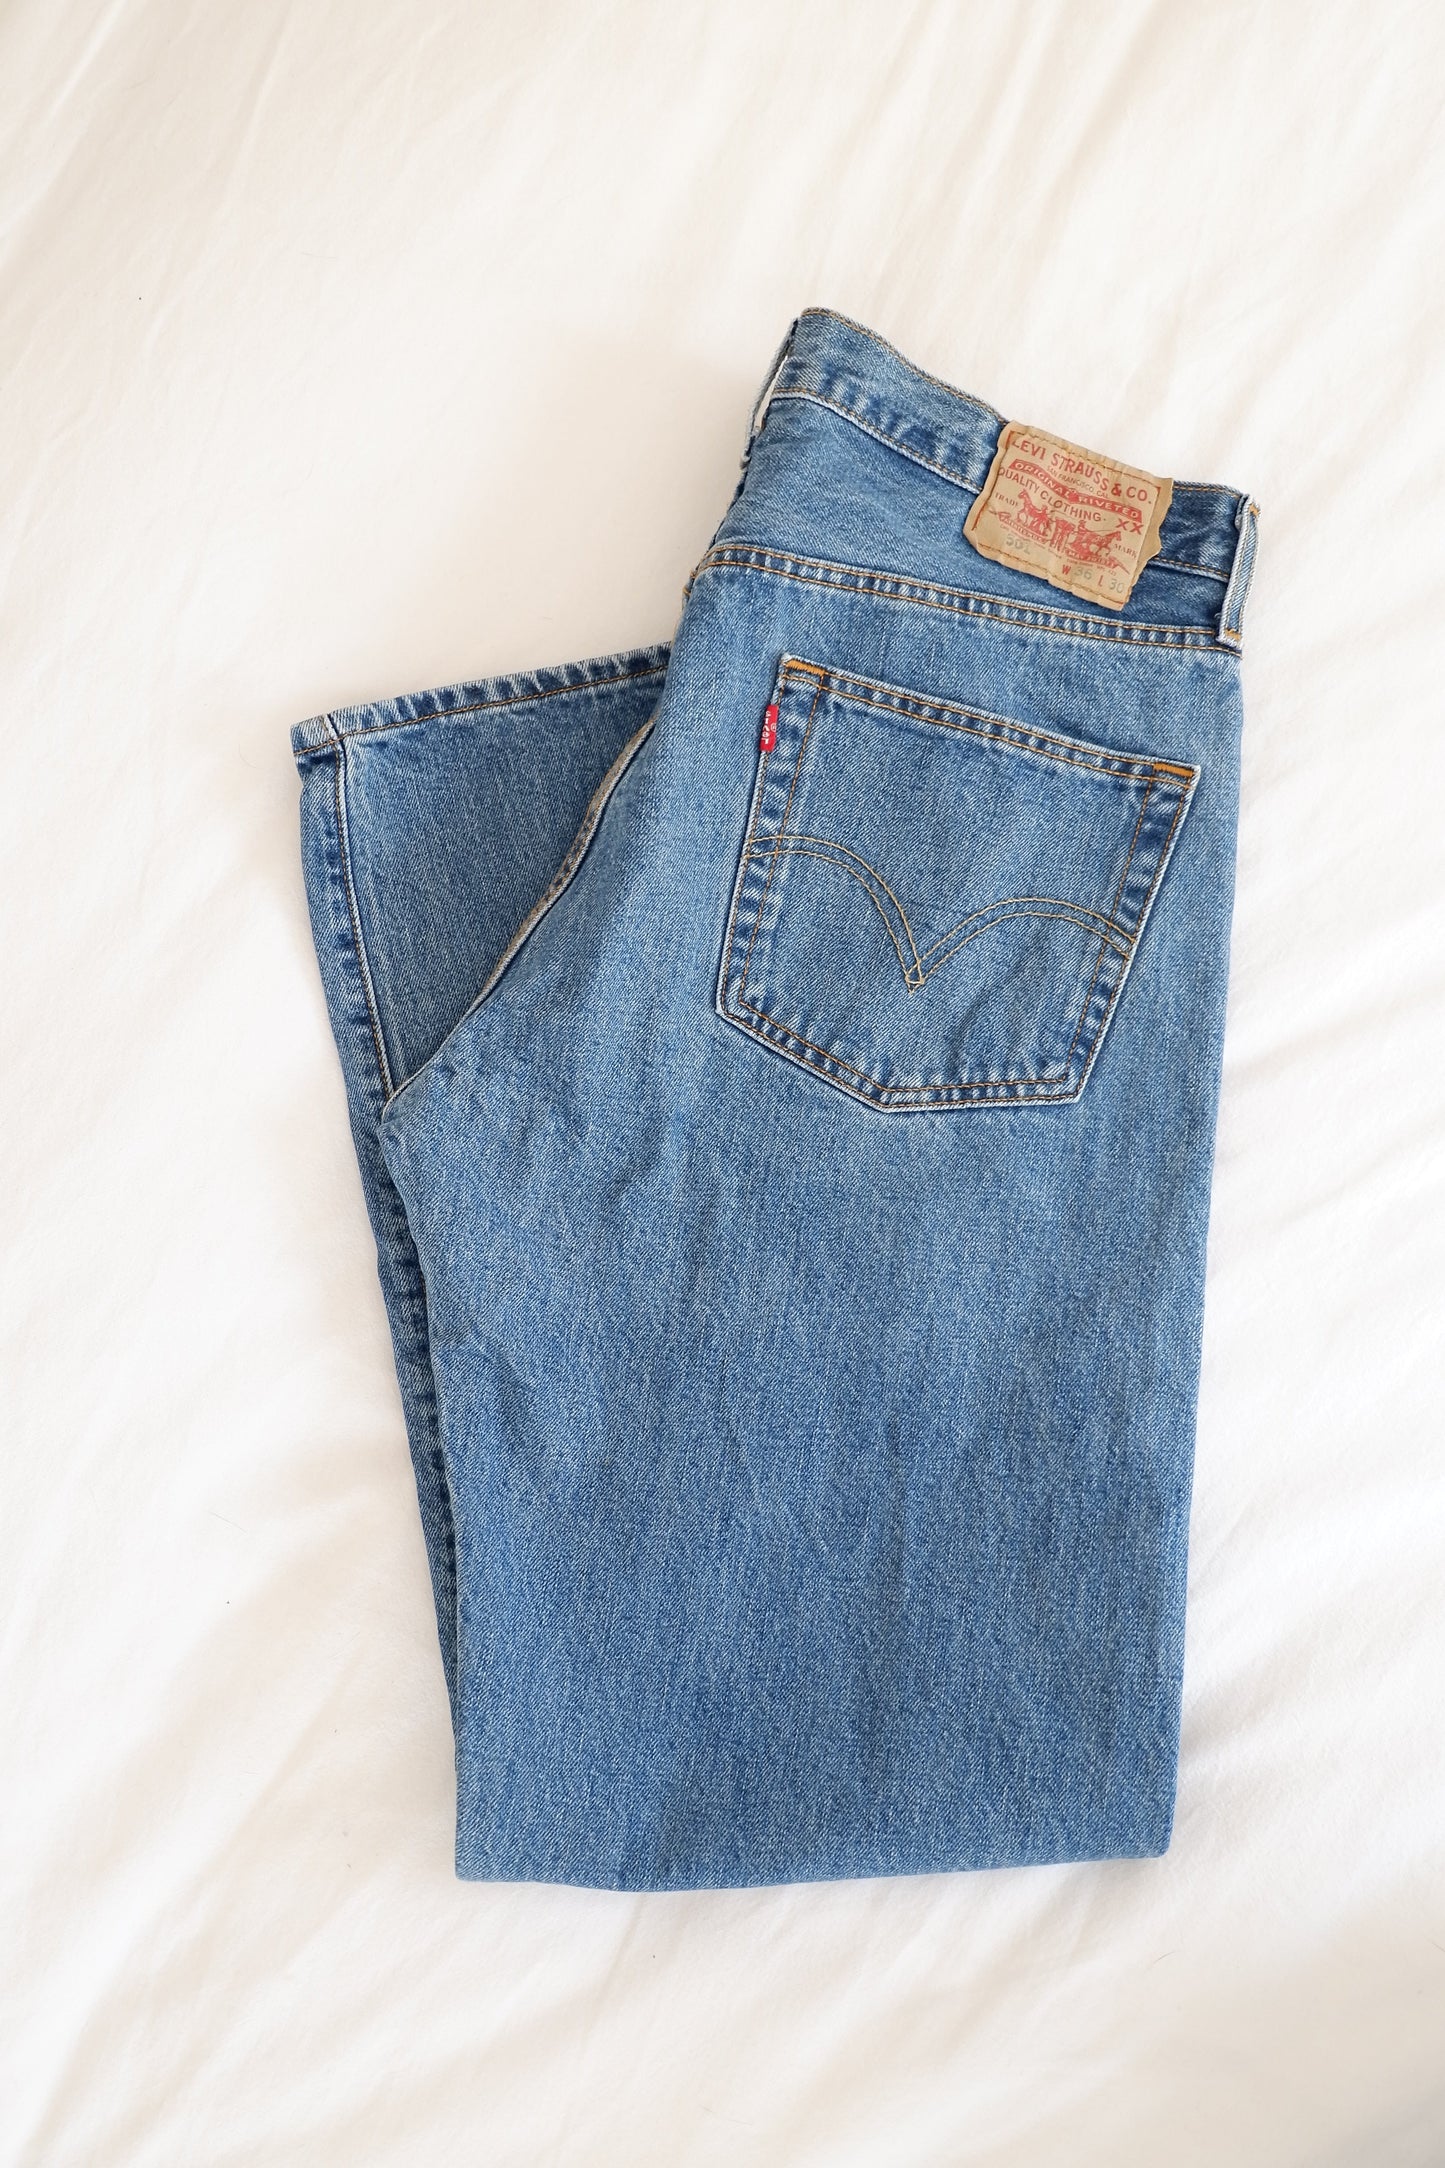 Levis 501 Medium Wash Relaxed Fit Straight Leg Jeans - 34